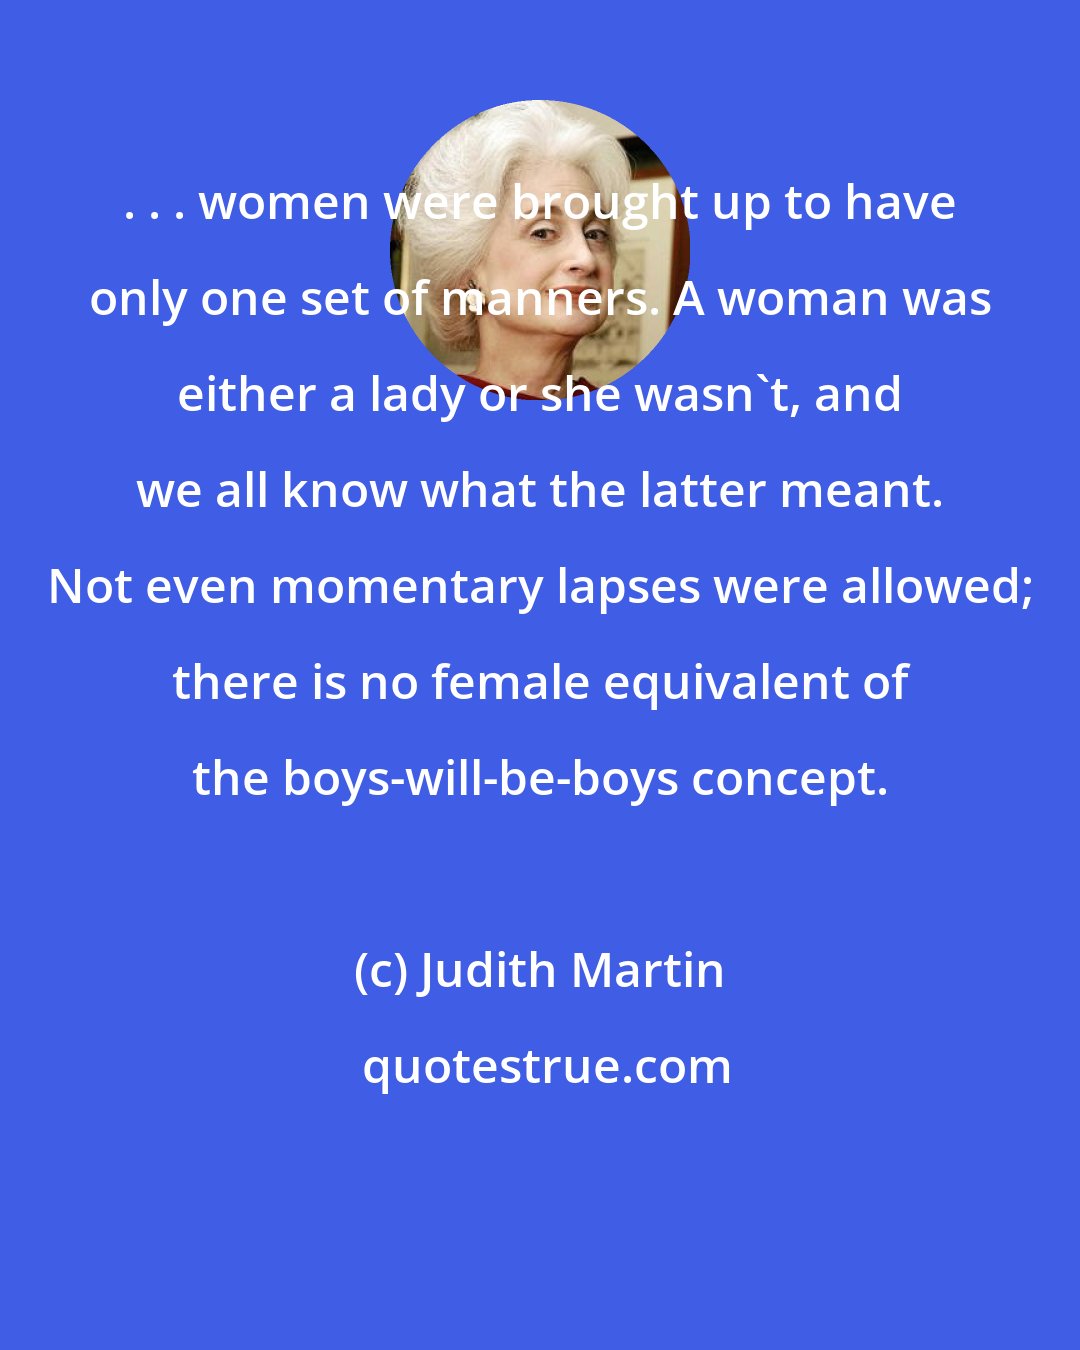 Judith Martin: . . . women were brought up to have only one set of manners. A woman was either a lady or she wasn't, and we all know what the latter meant. Not even momentary lapses were allowed; there is no female equivalent of the boys-will-be-boys concept.